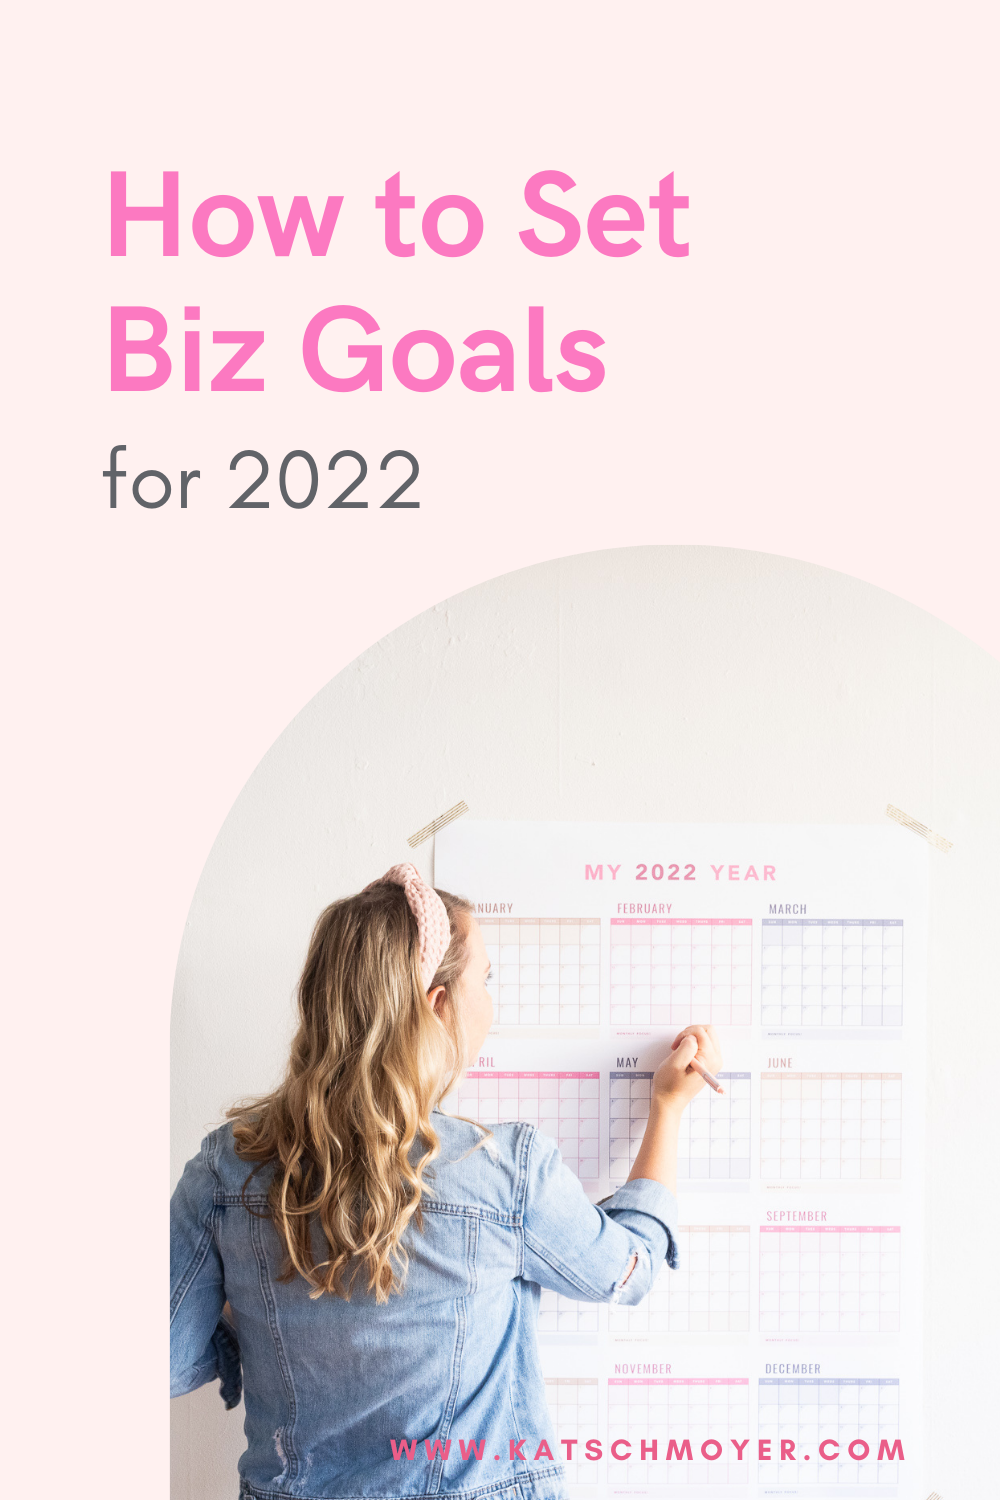 How to Set Goals for Your Biz in 2022